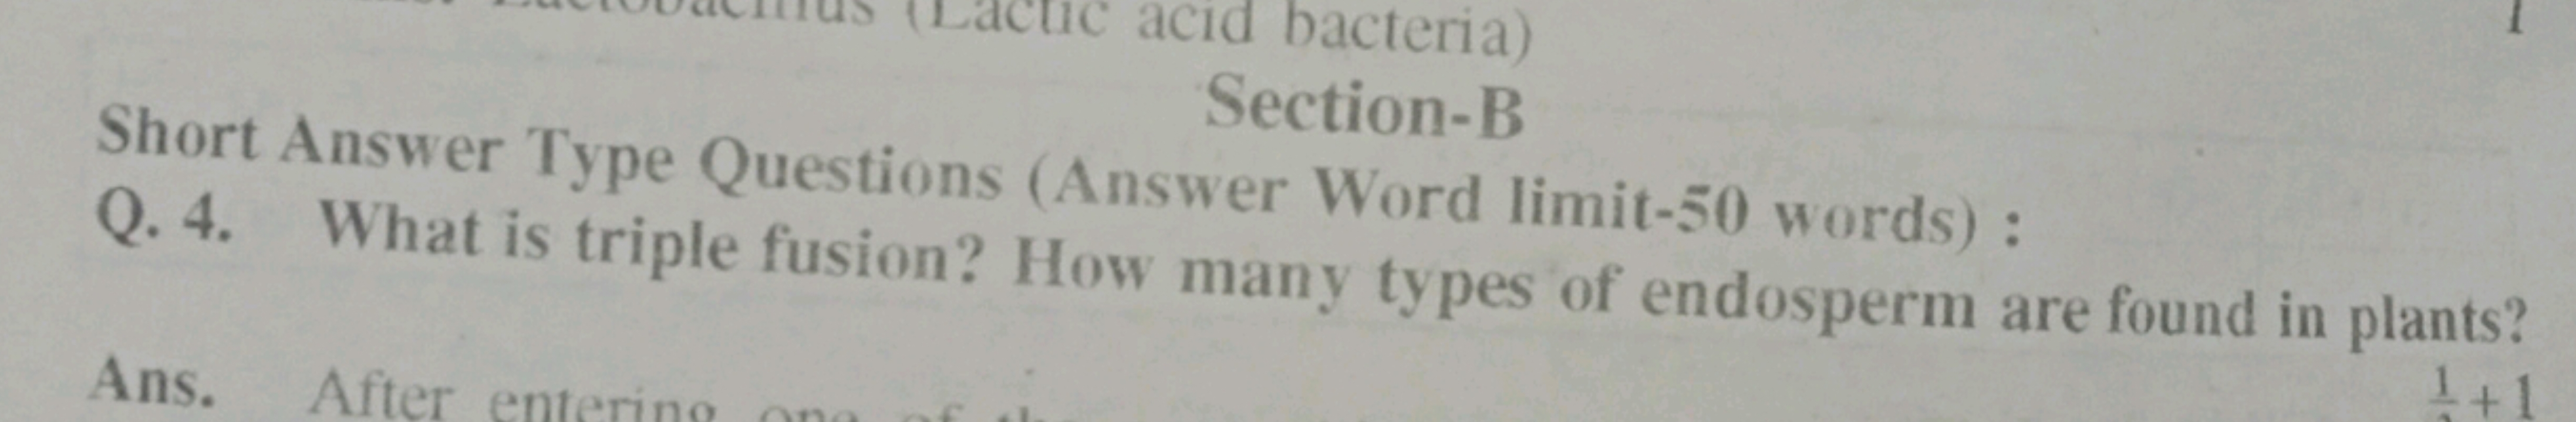 bacteria)
Section-B
Short Answer Type Questions (Answer Word limit-50 